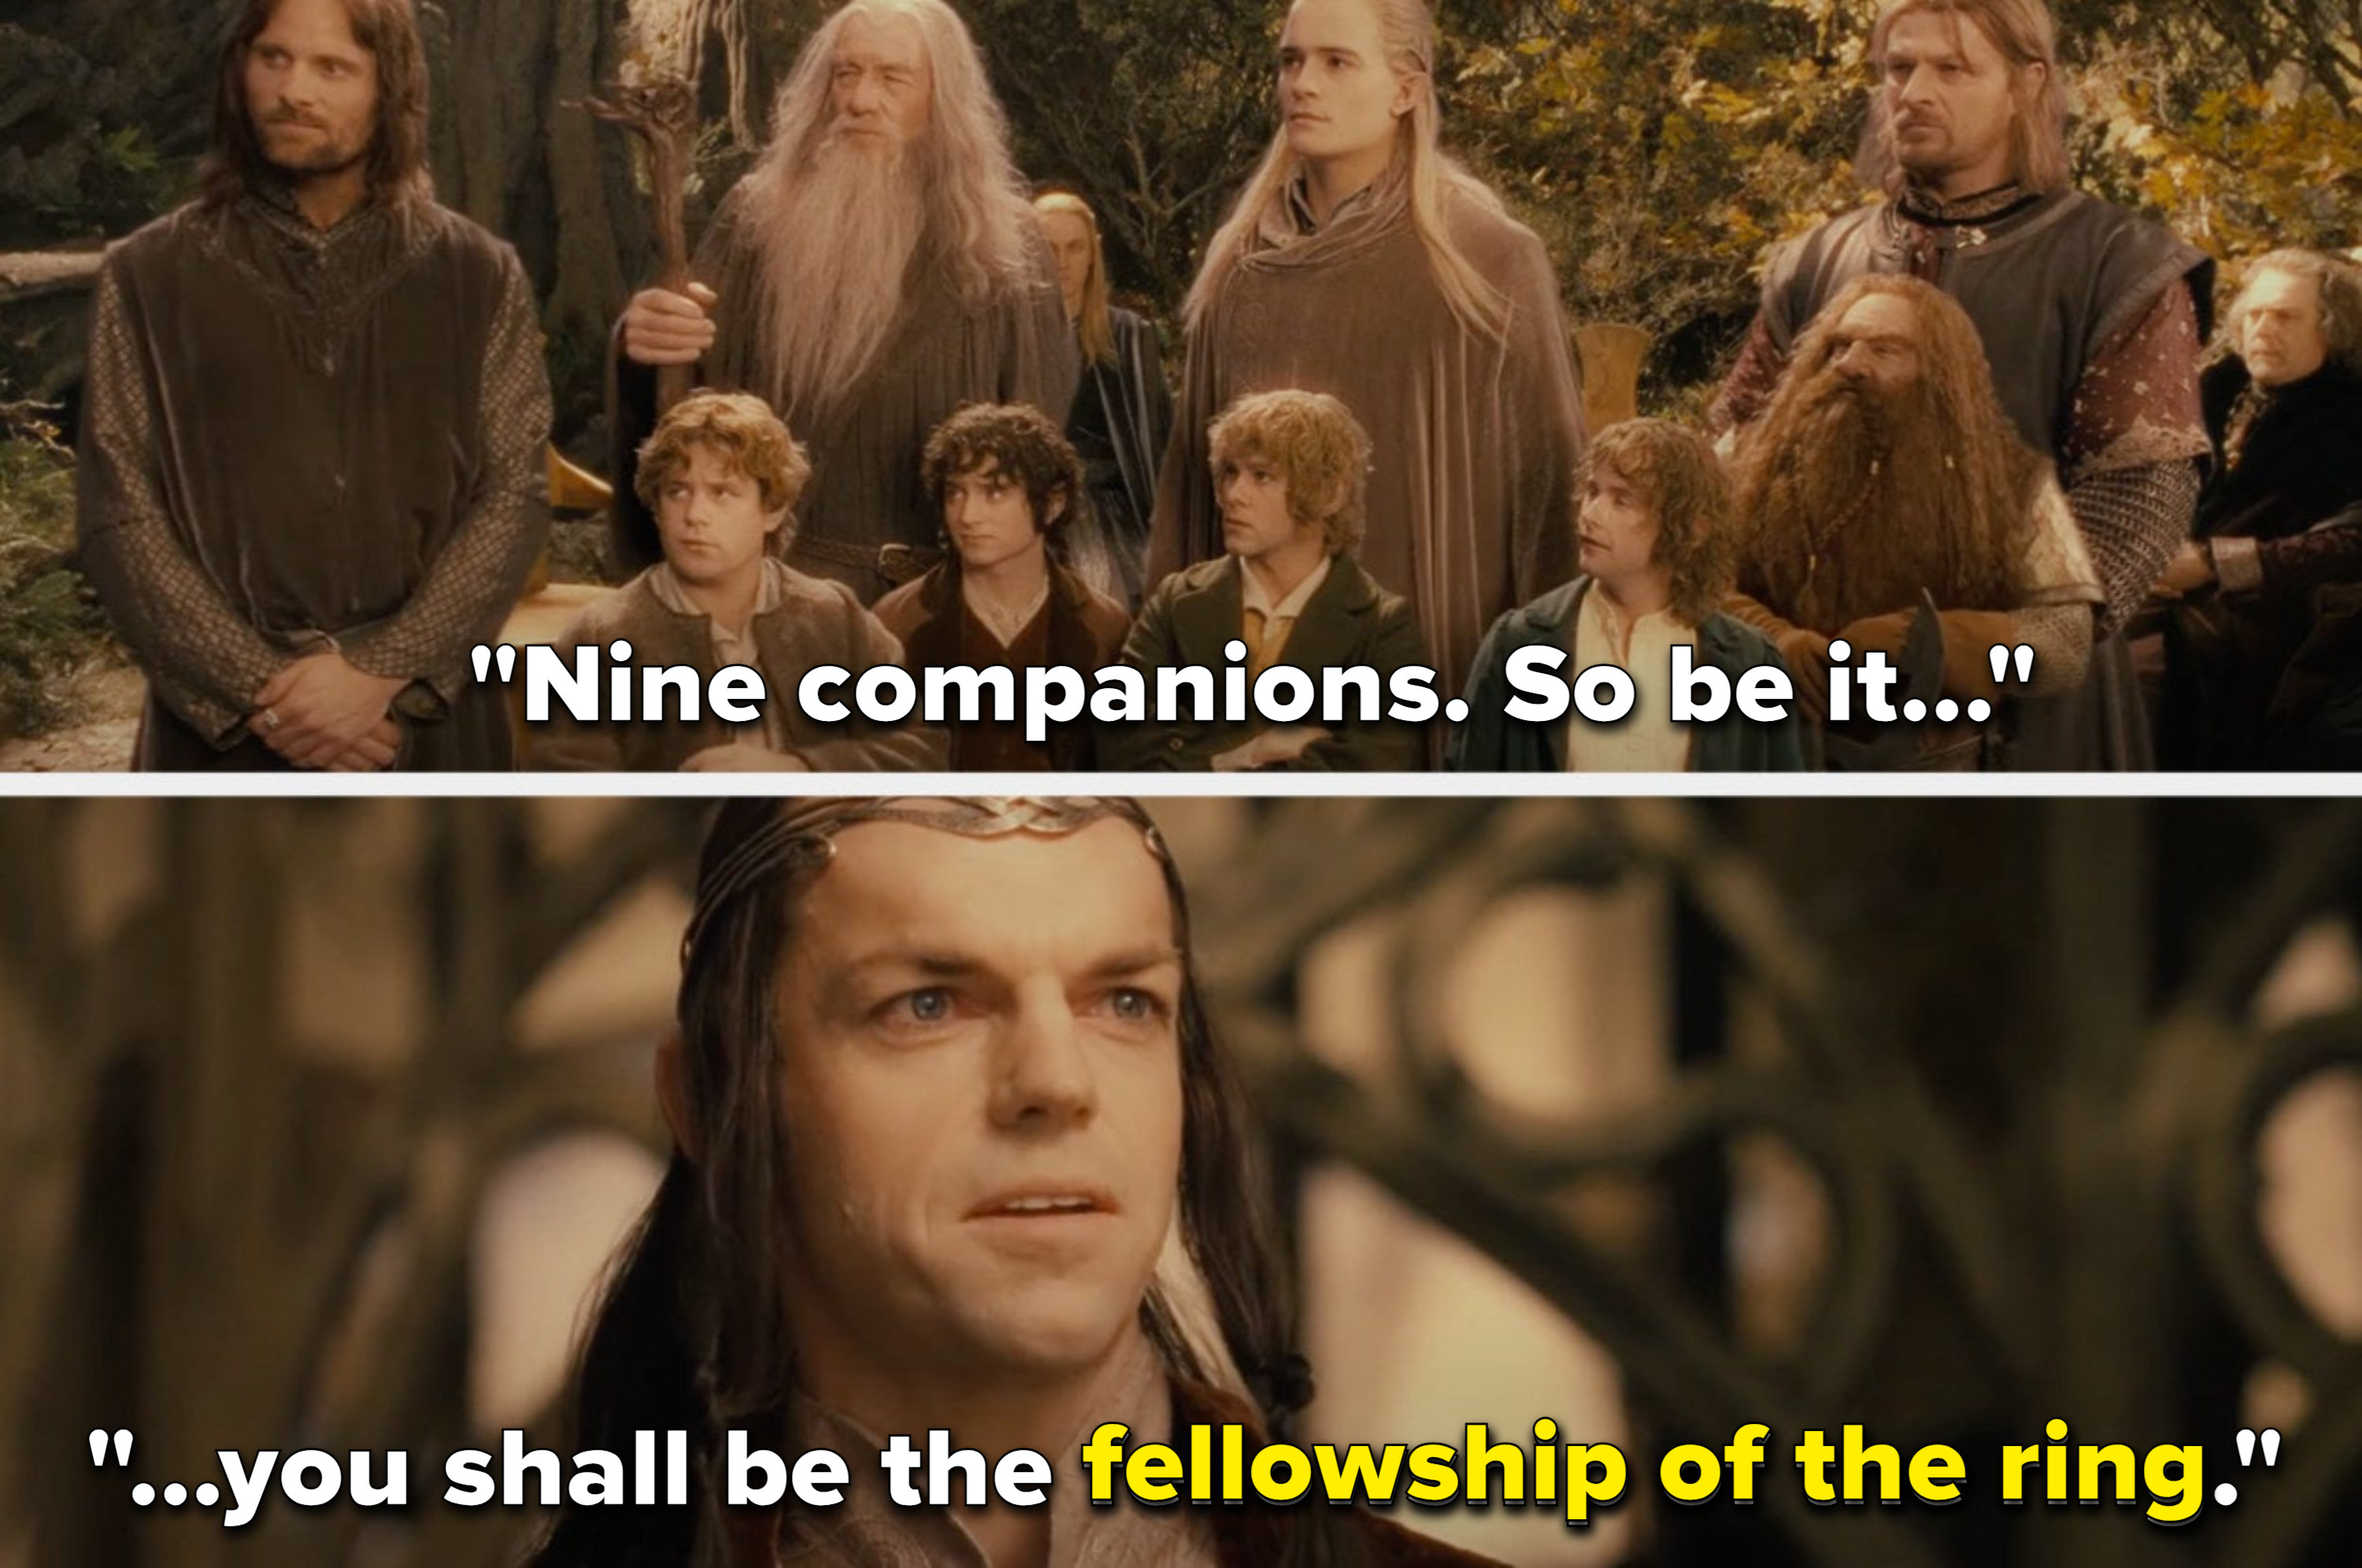 Elrond says, &quot;So be it, you shall be the Fellowship of the Ring&quot;